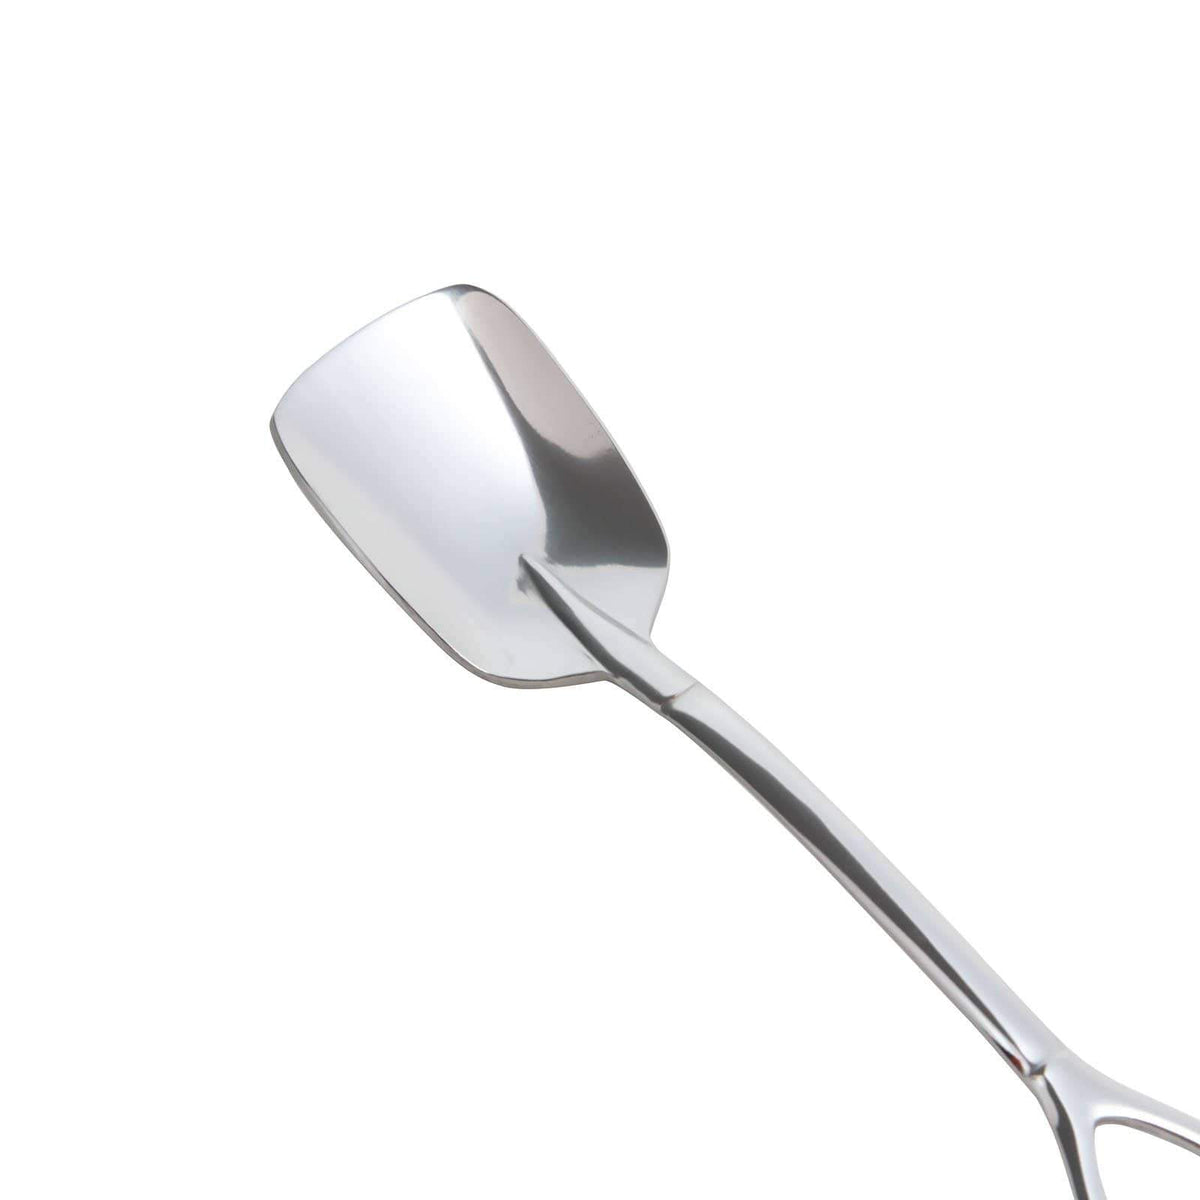 Takeda Garden Shovel Shaped Stainless Steel Ice Cream Spoon 11.5cm (Square Head) (Mirror Finish) Loose Cutlery